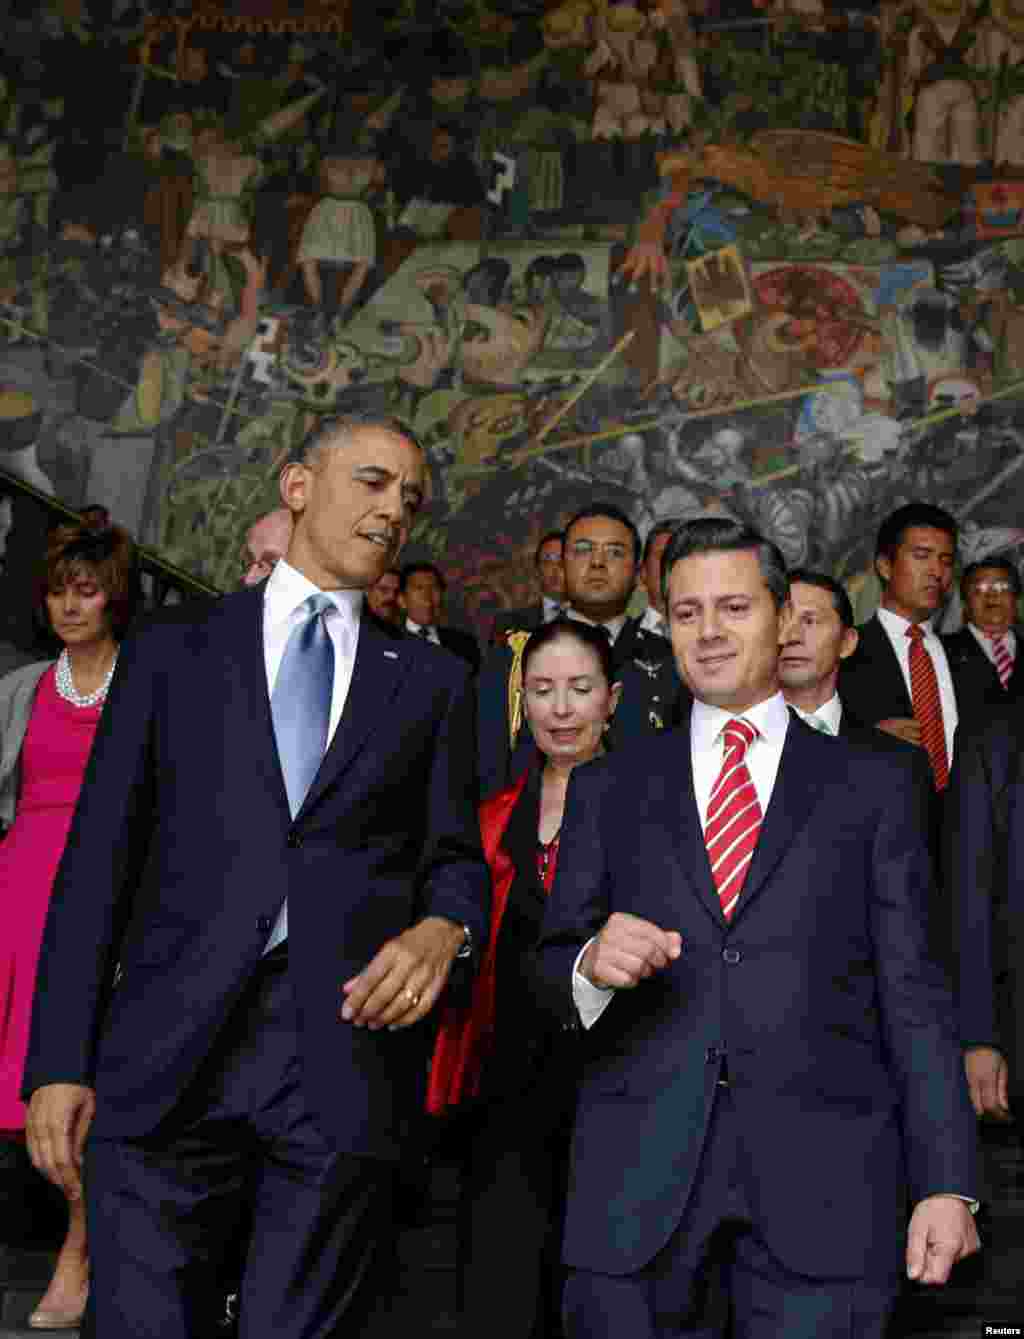 U.S. President Barack Obama and his Mexican counterpart Enrique Pena Nieto walk down a staircase at the National Palace in Mexico City, May 2, 2013.